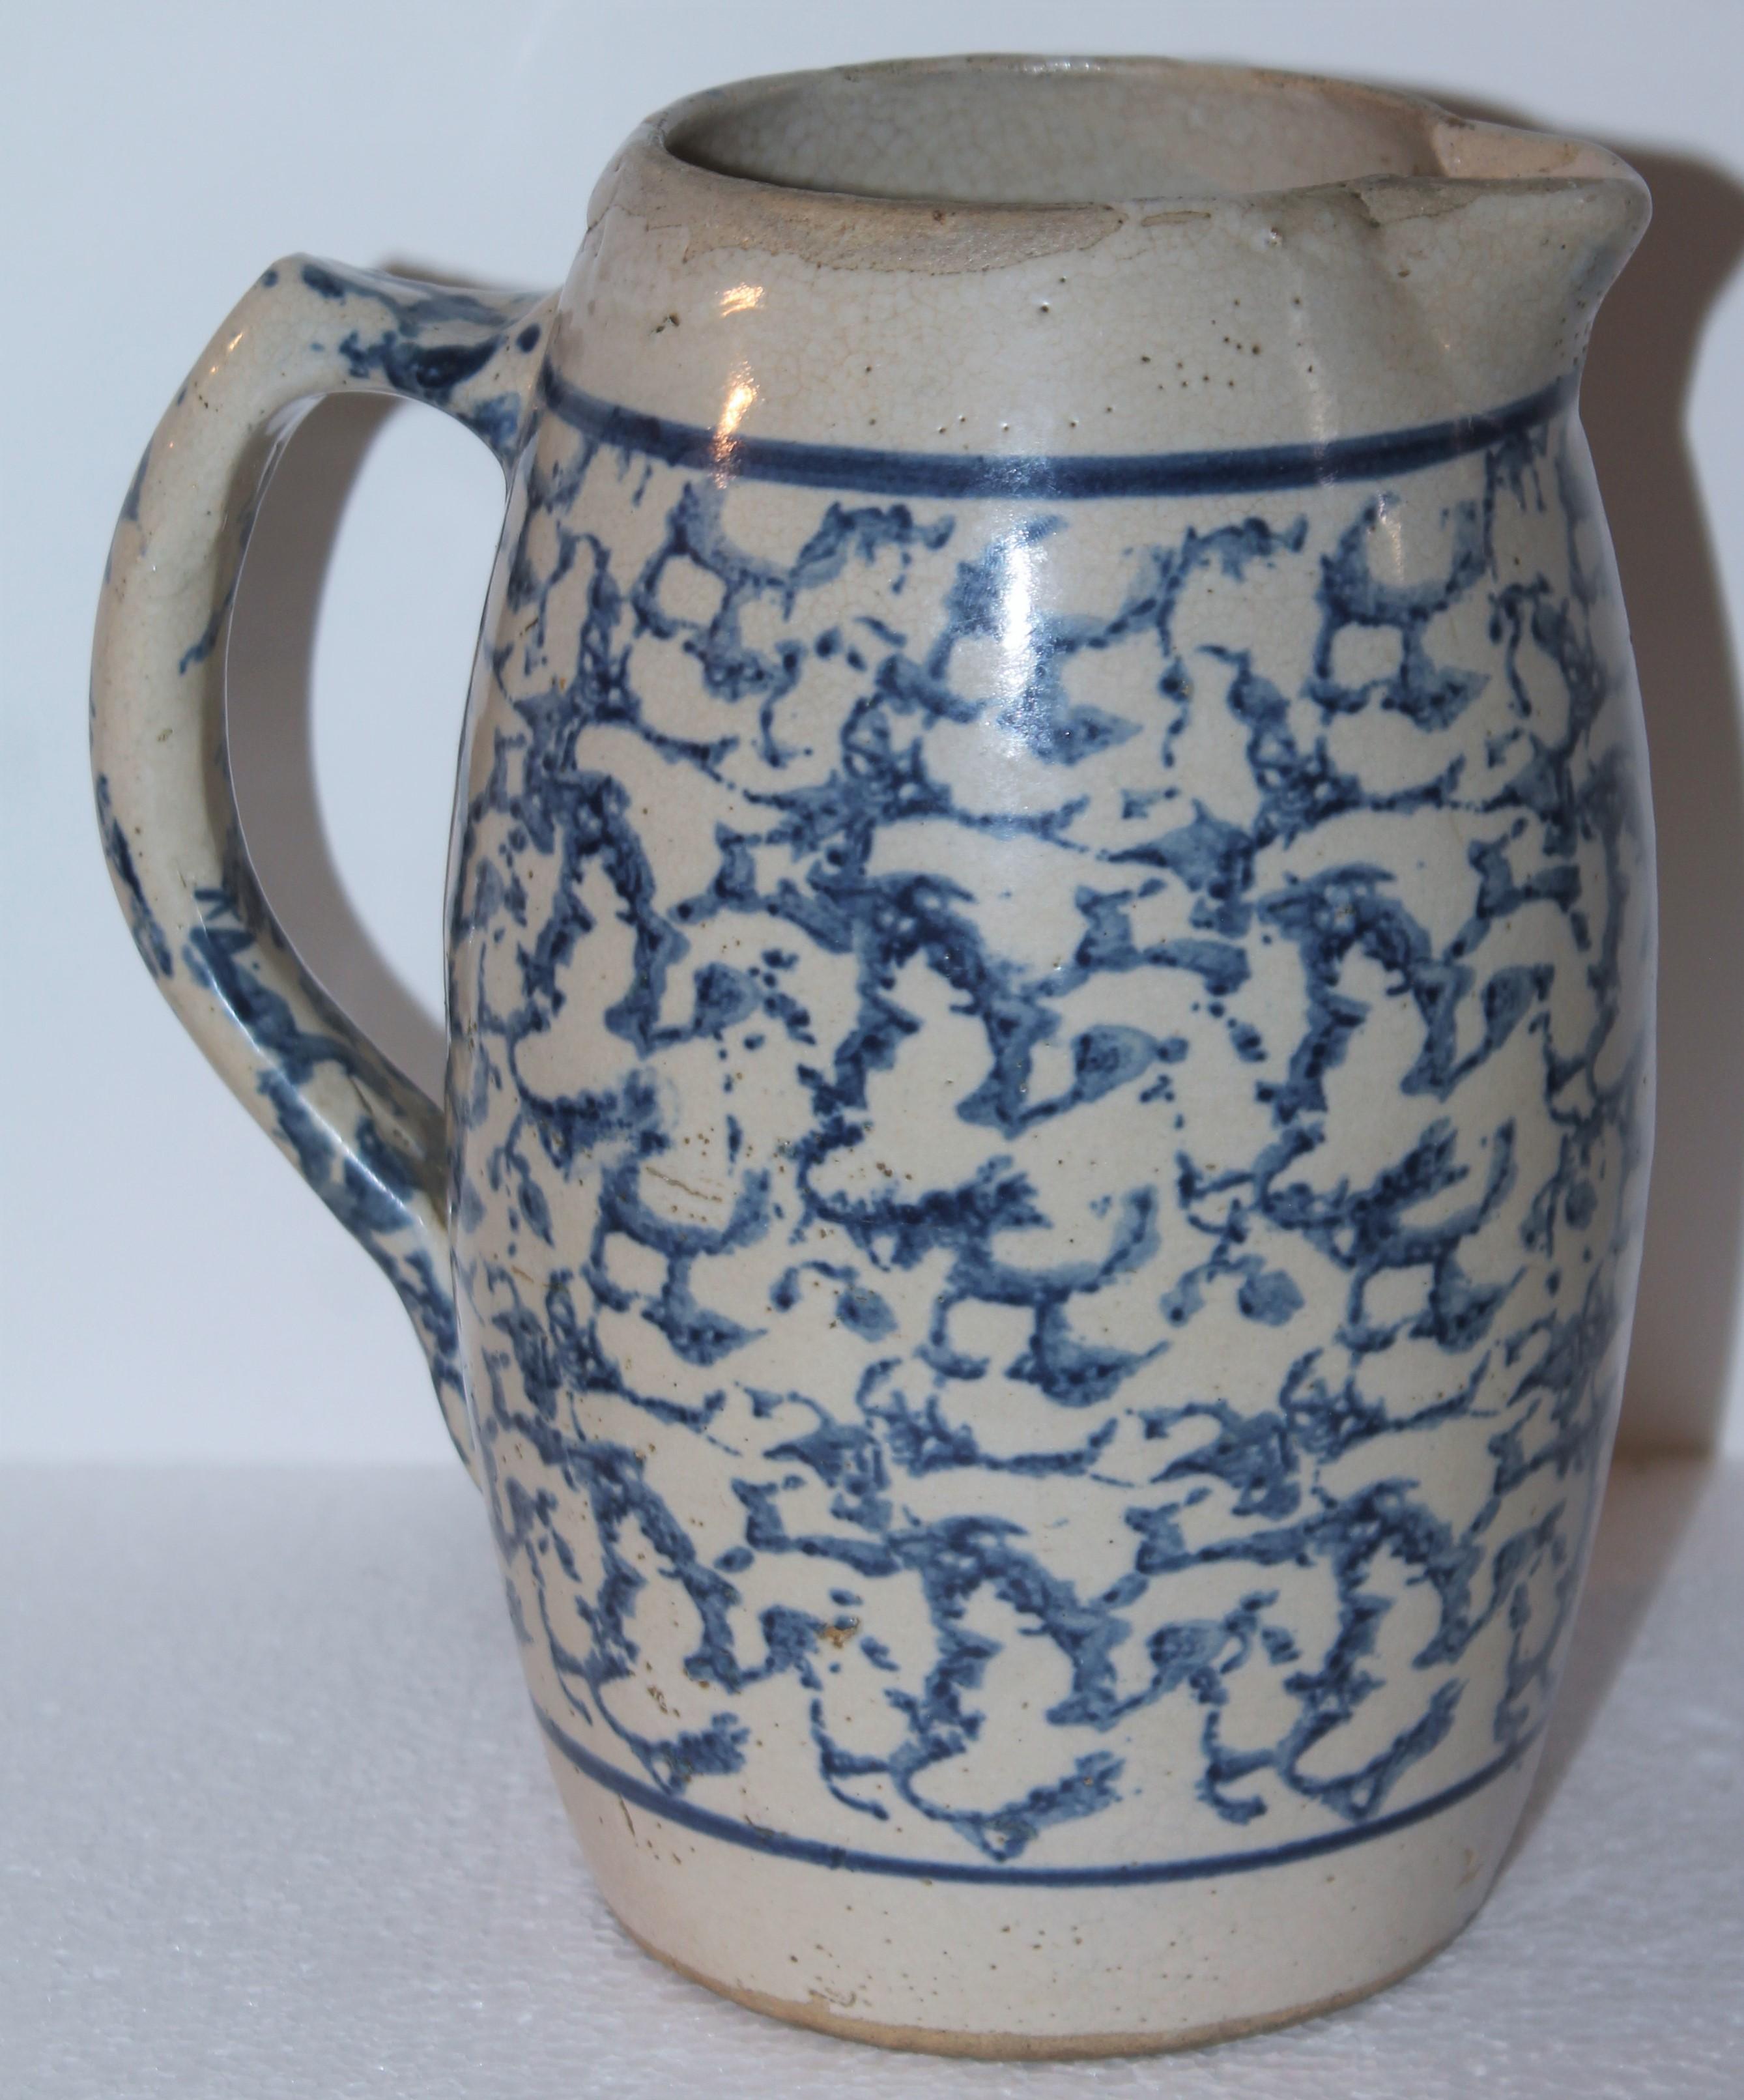 19thc blue & white sponge ware barrel pottery pitcher. This is a very hard to find pitcher.